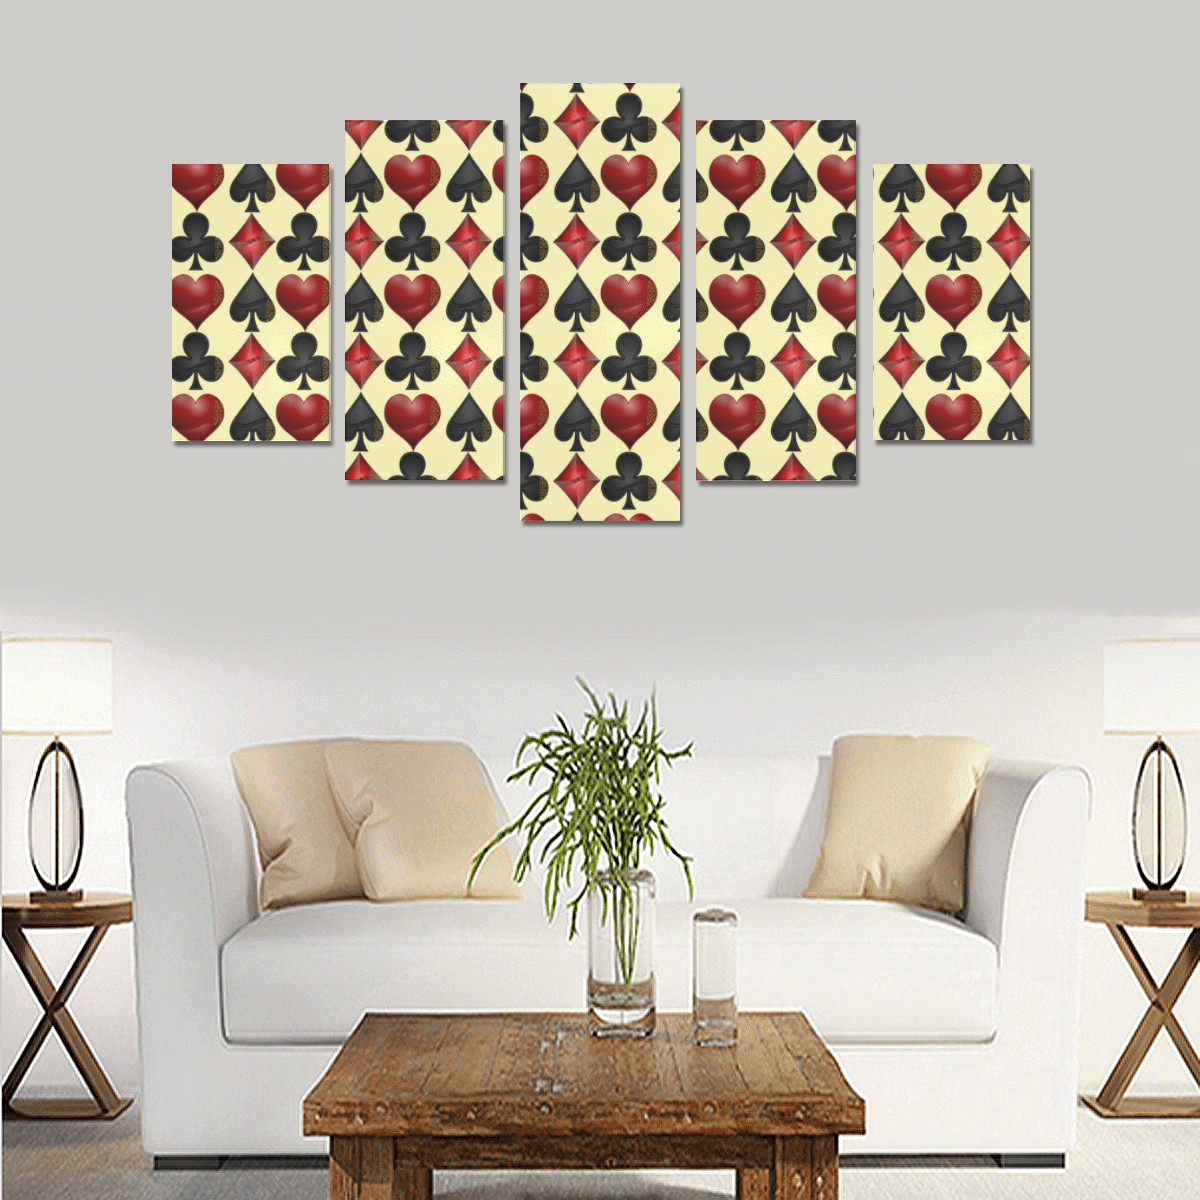 Las Vegas Black and Red Casino Poker Card Shapes on Yellow Canvas Print Sets A (No Frame)